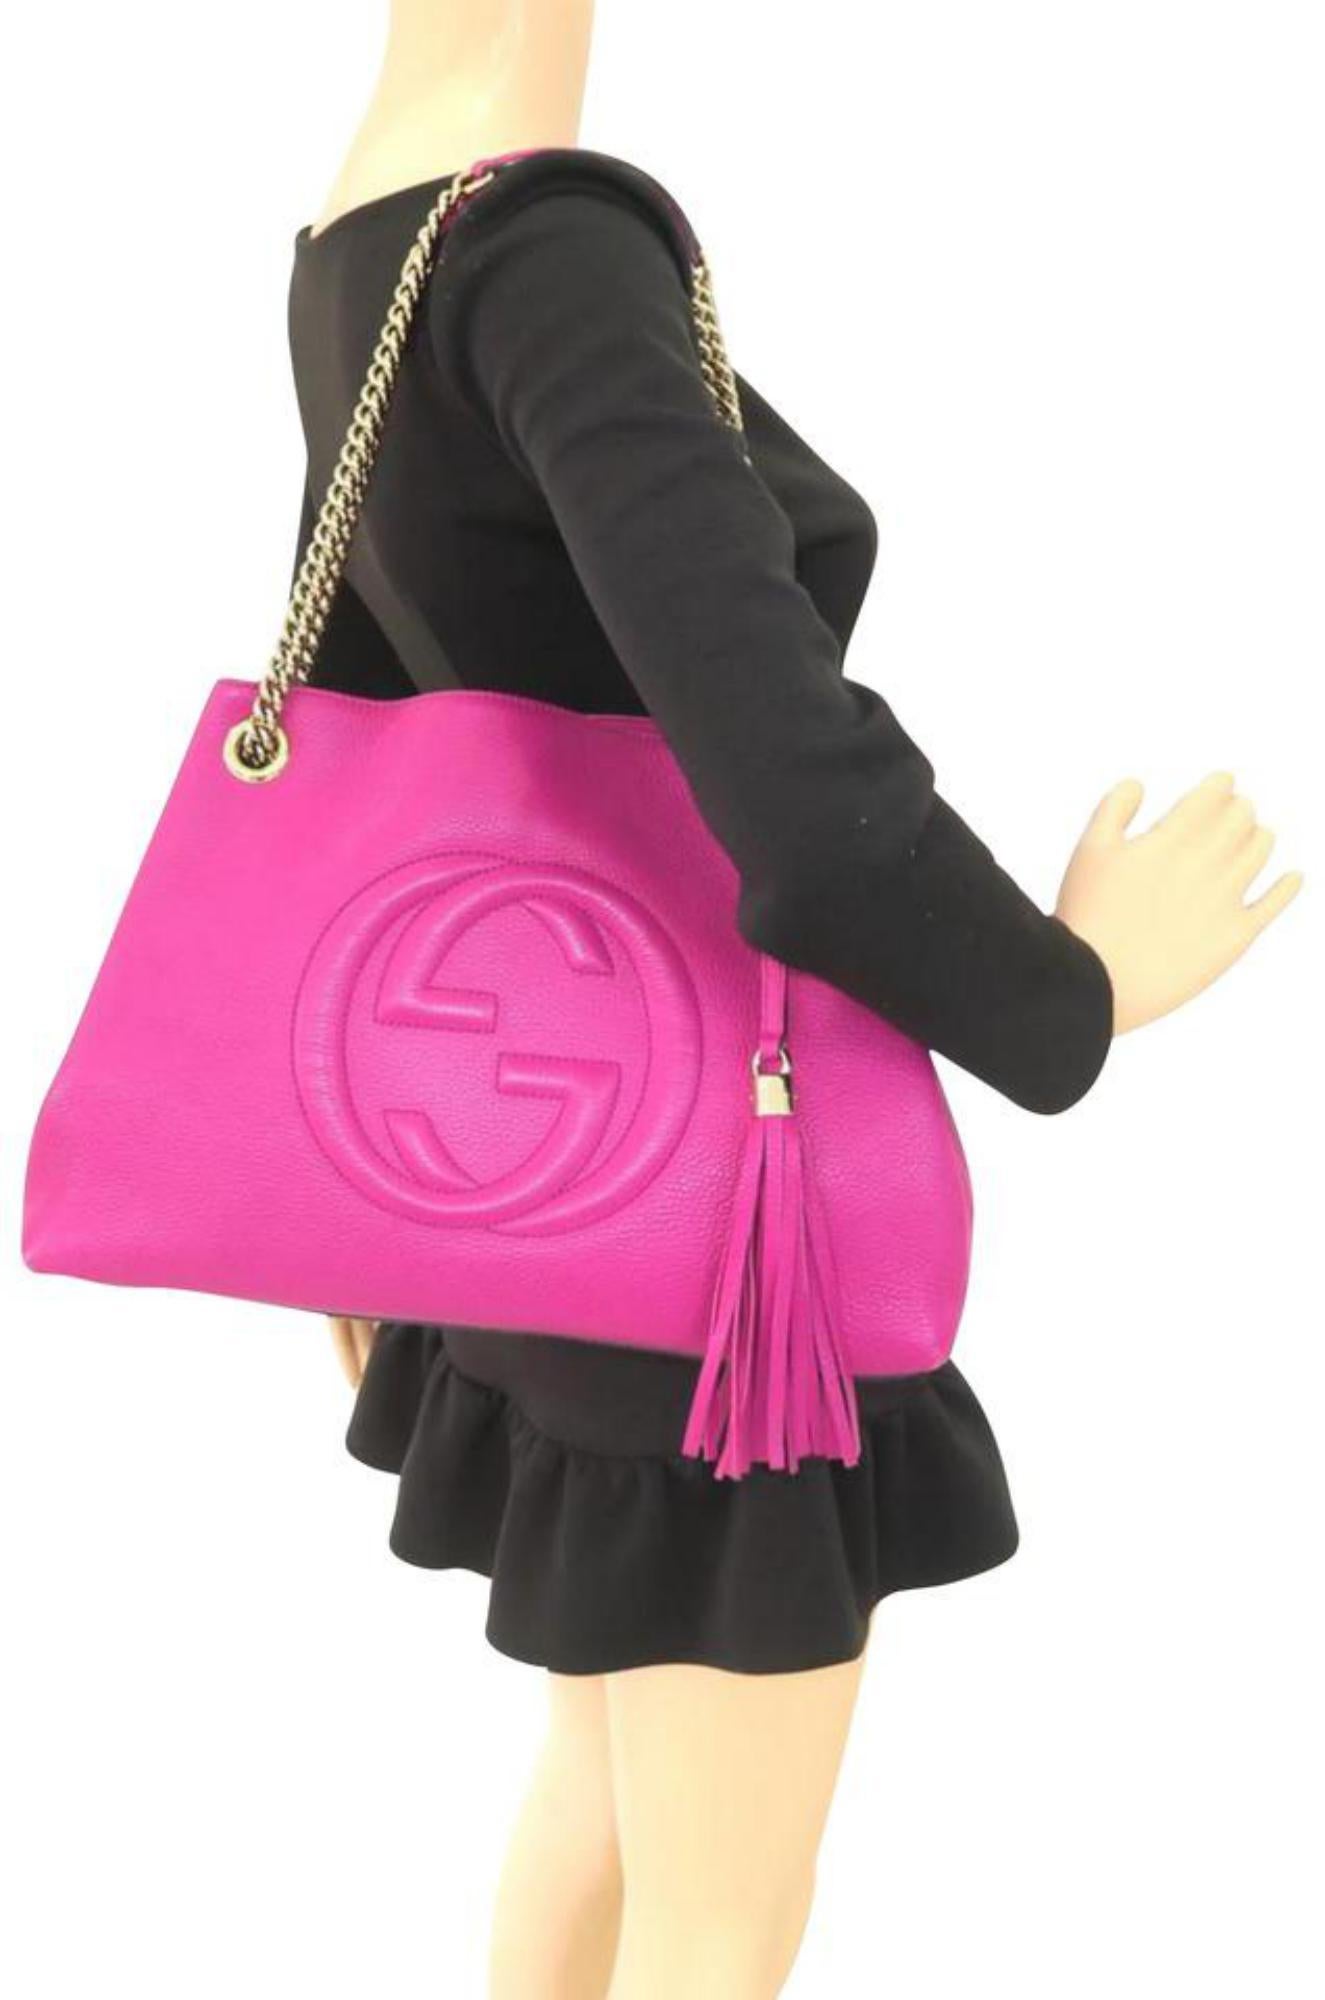 Gucci Soho Fringe Tassel Fuchsia Chain Tote 869084 Pink Leather Shoulder Bag In Excellent Condition In Forest Hills, NY